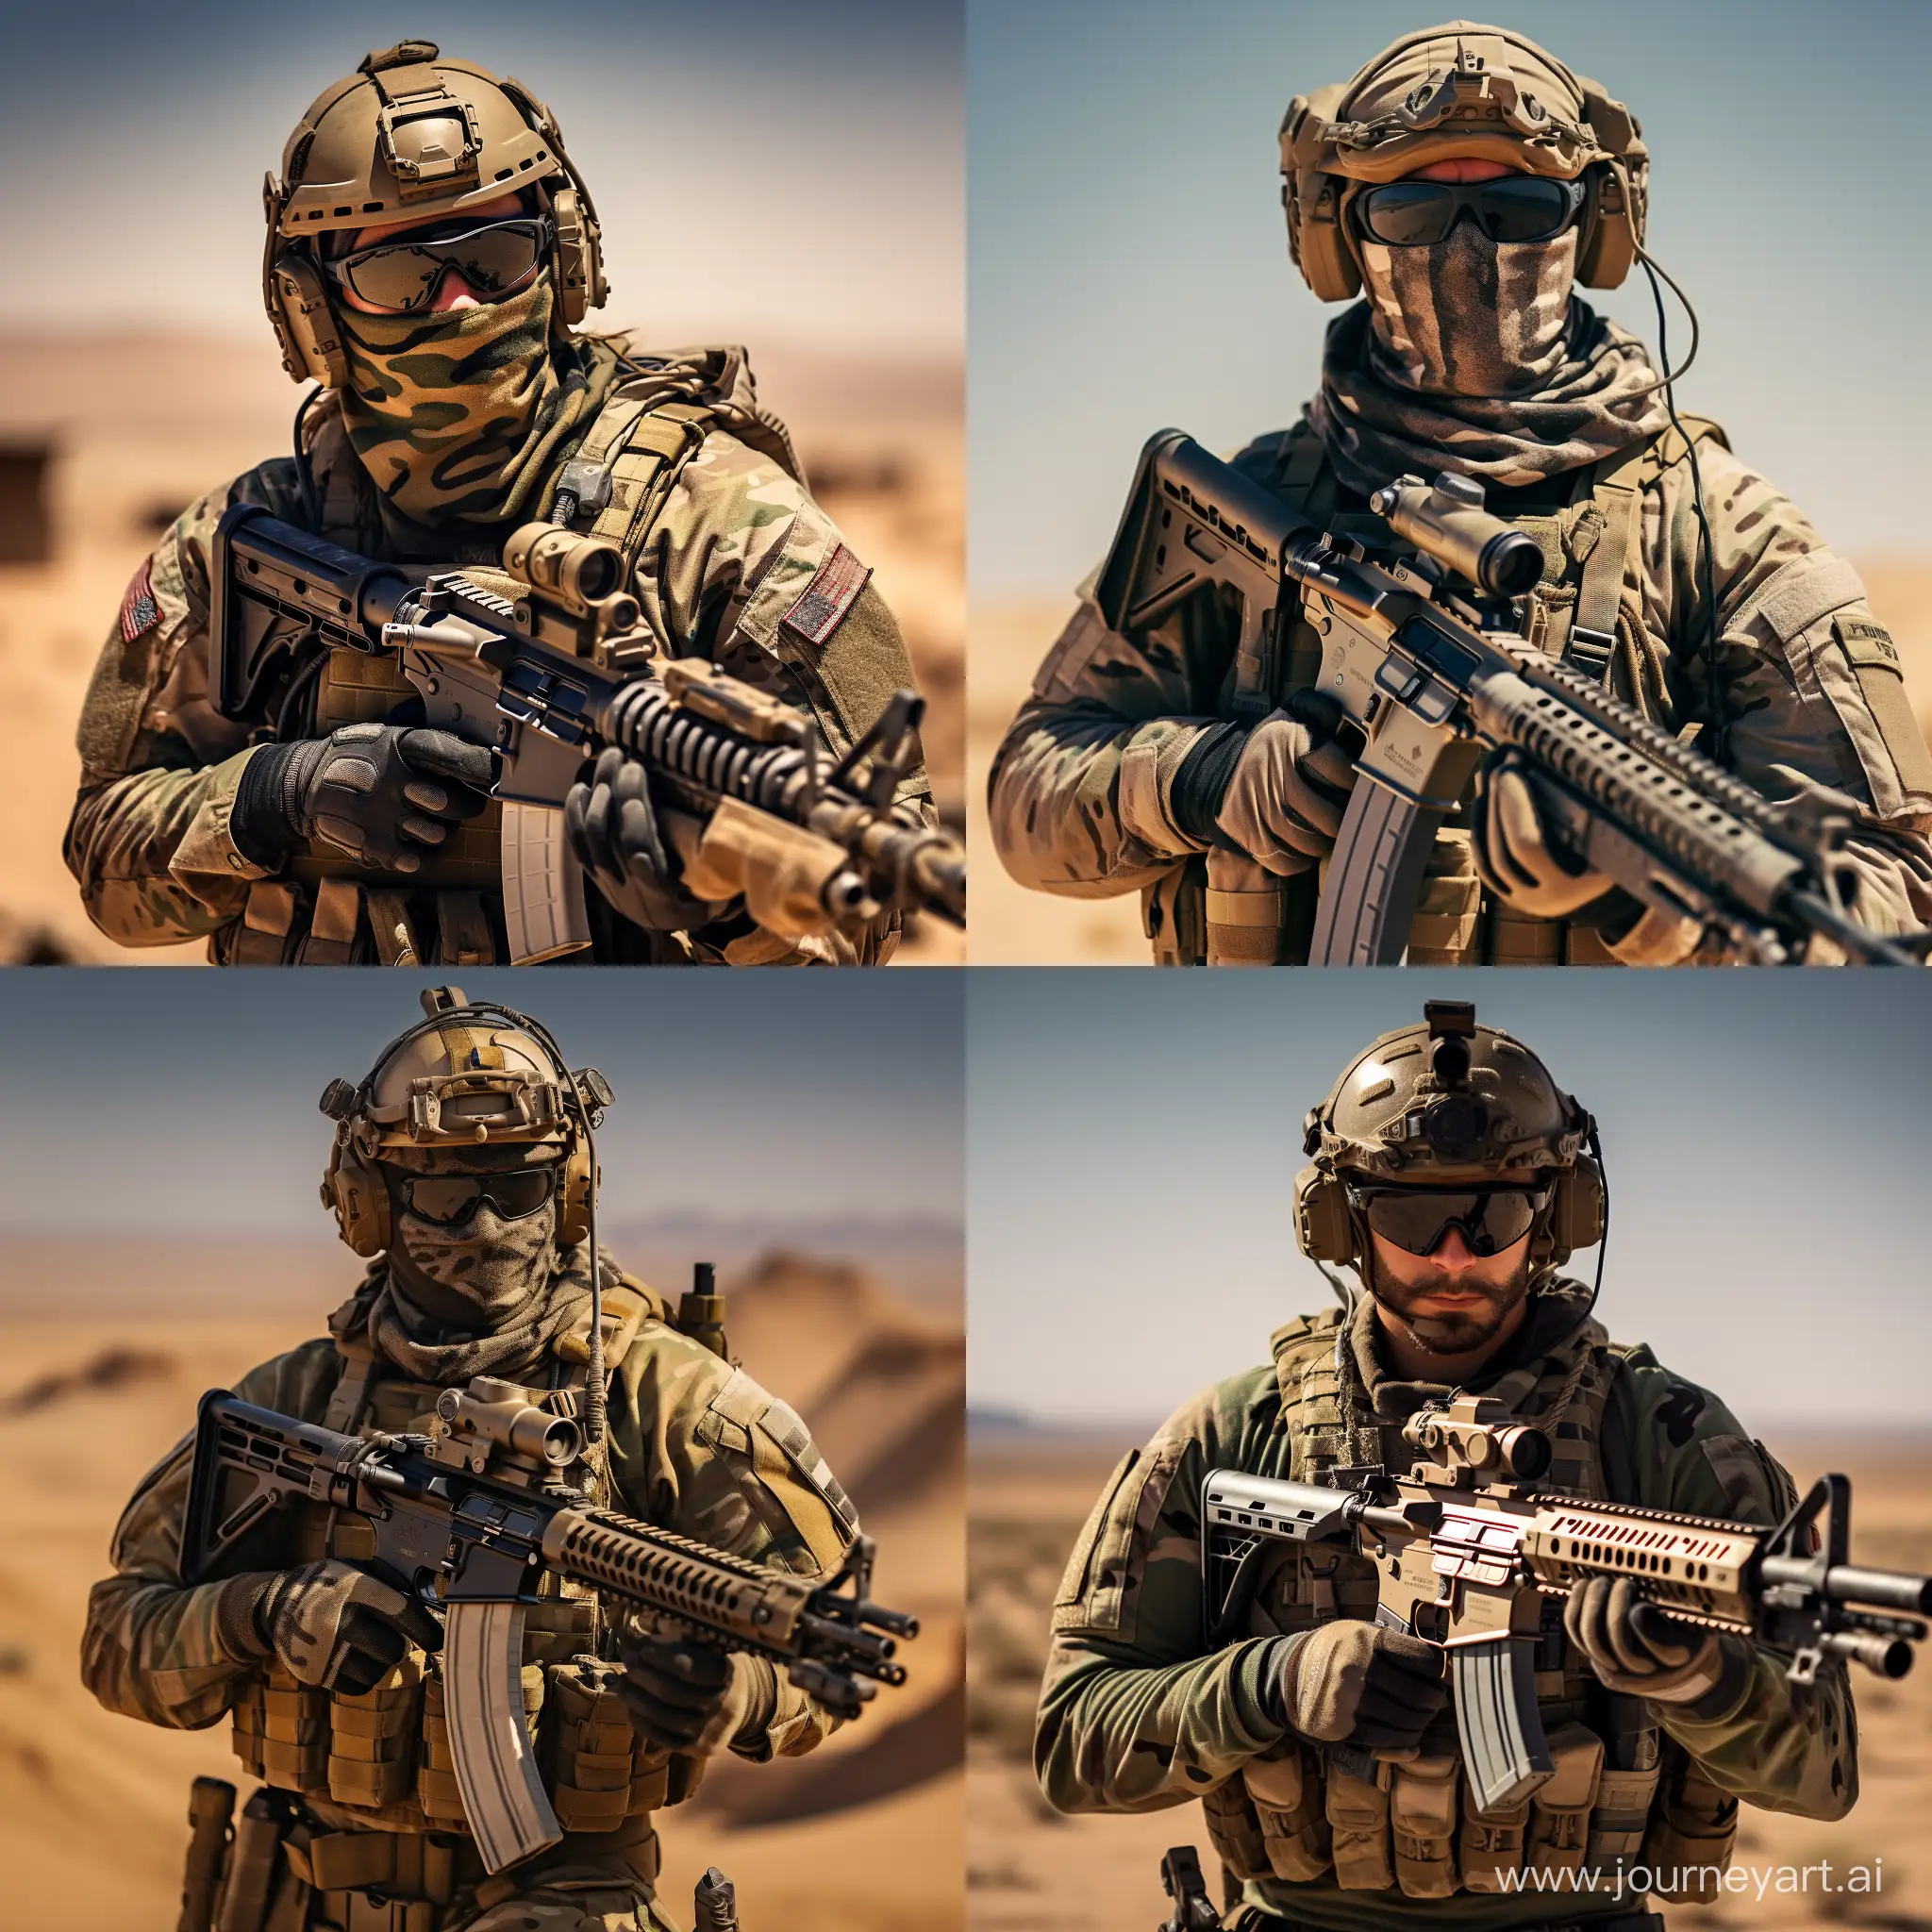 Elite-US-Army-Soldier-in-Desert-Gear-with-M4A1-Weapon